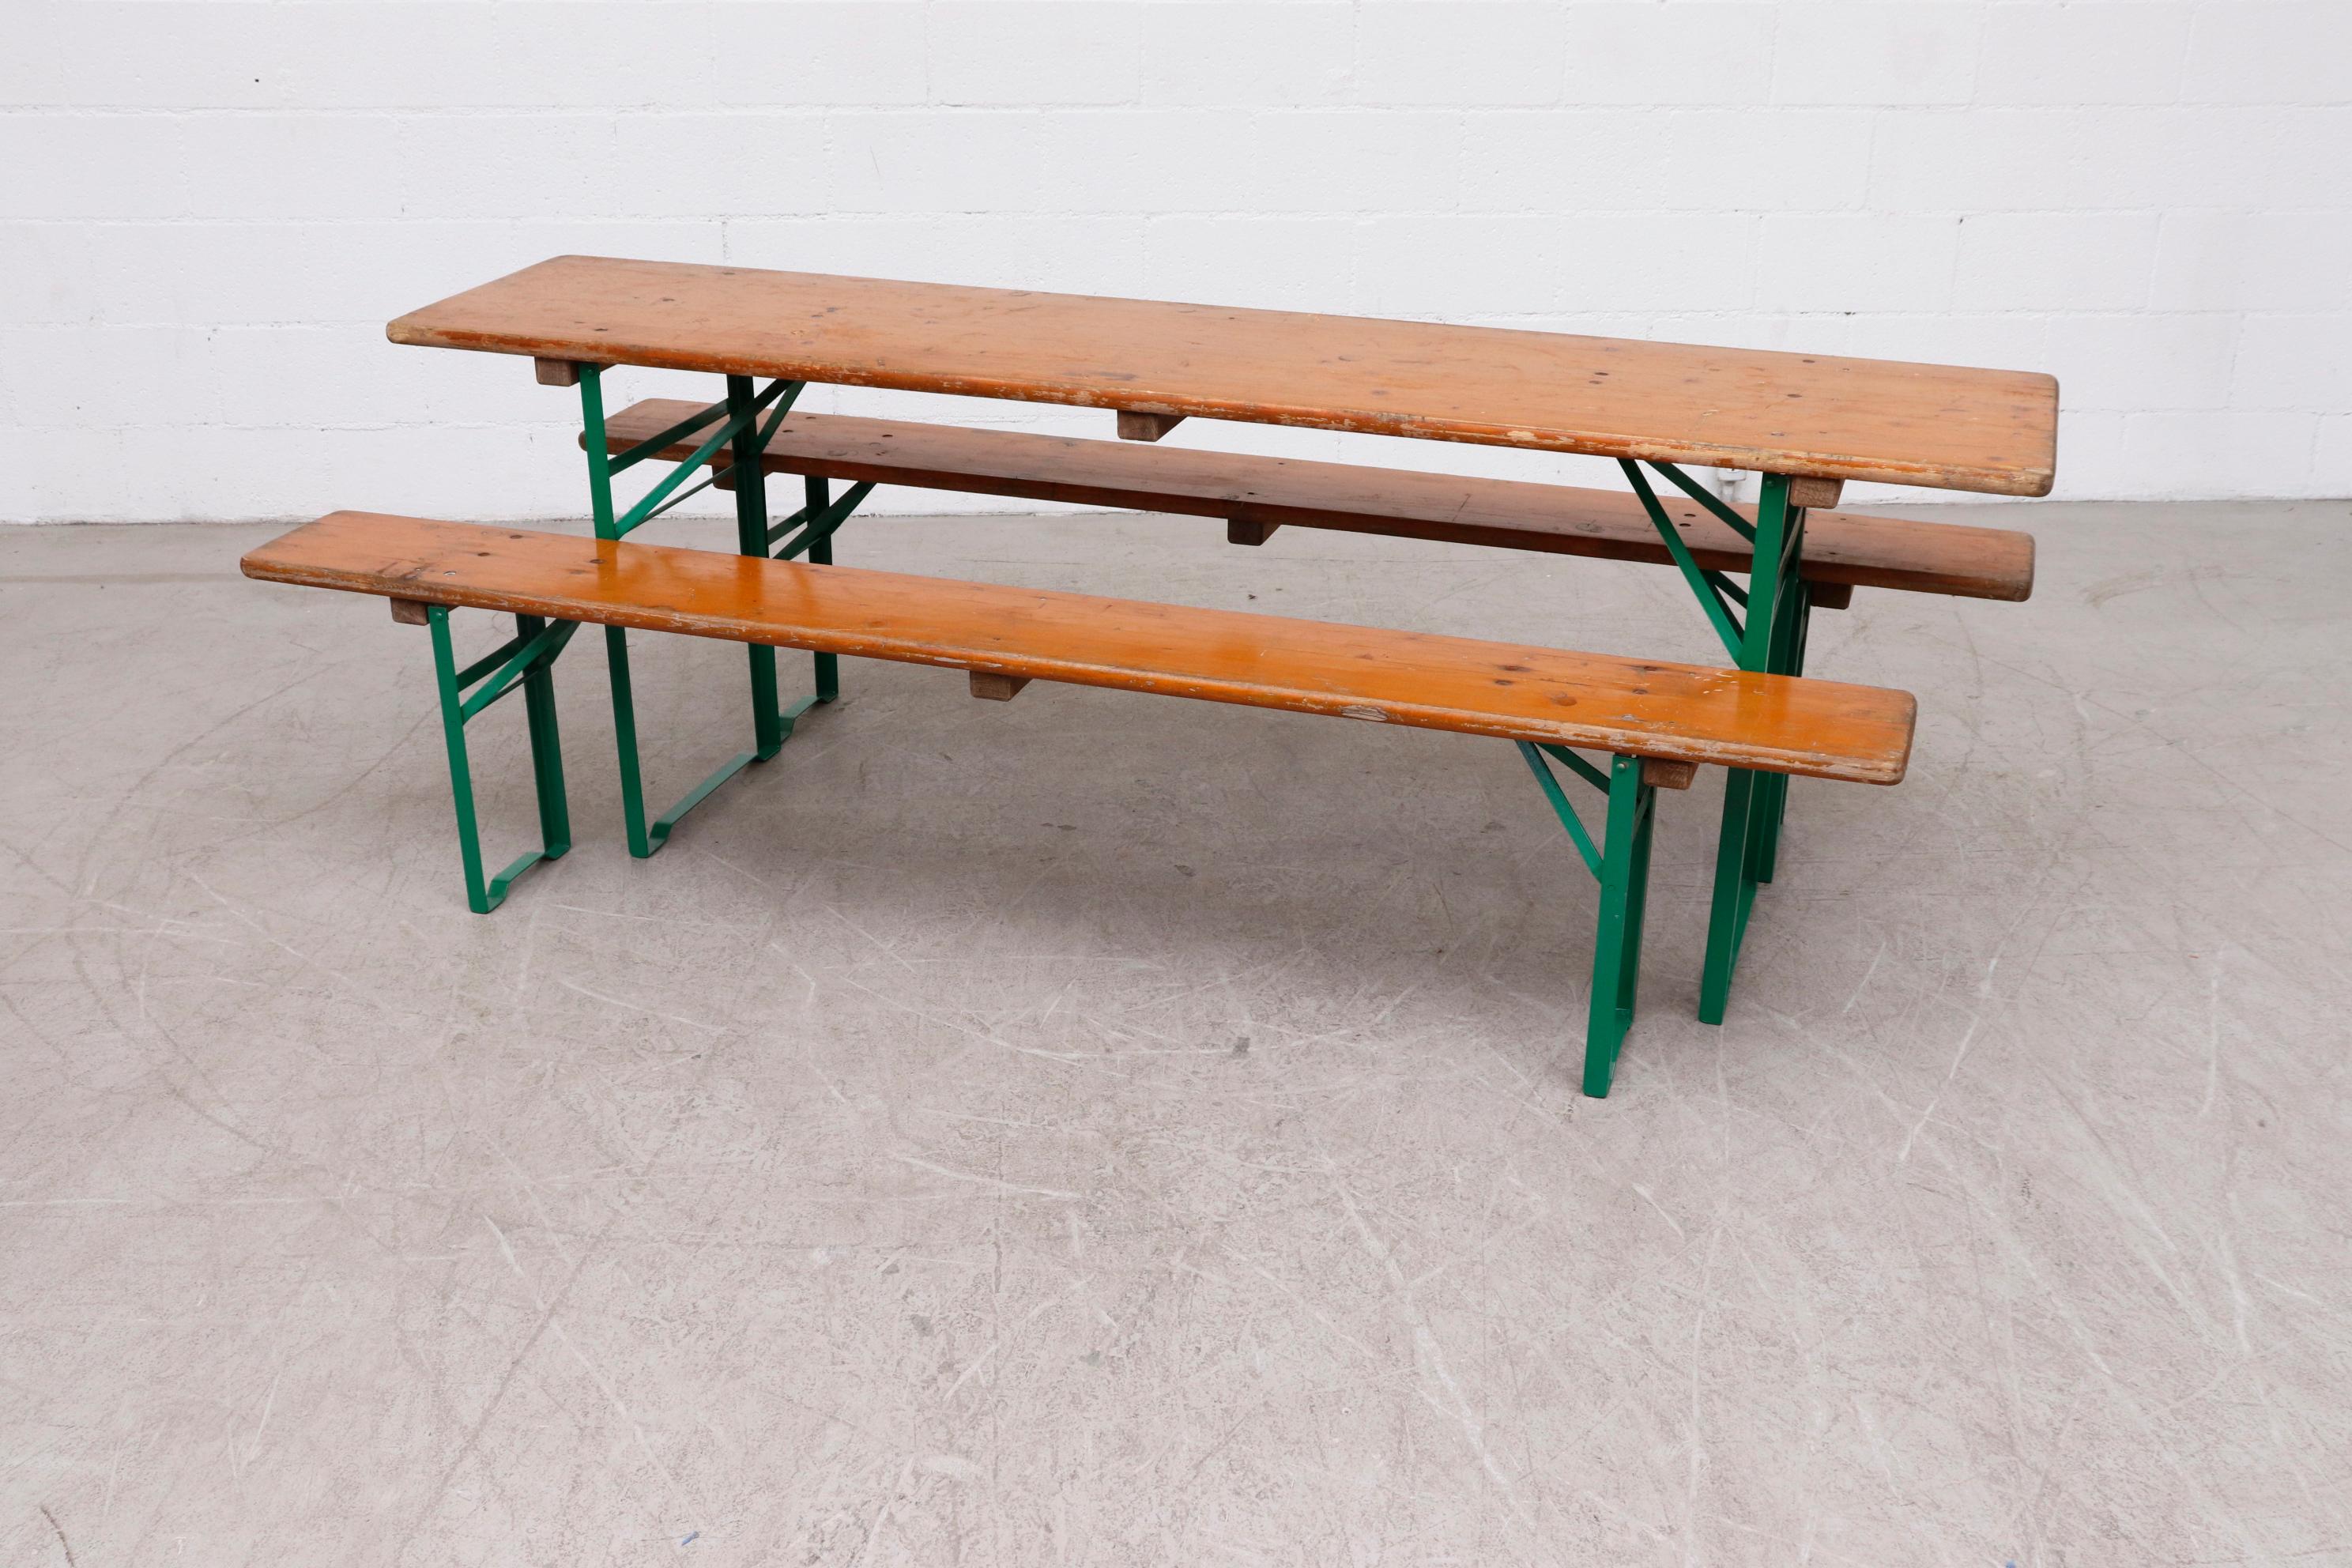 Original German beer garden wood topped folding table and bench sets. Sold as a set of 2 benches and 1 table. Metal is in original condition with visible patina. Wood in original used condition as well. Sets vary in color and wear. Benches measure